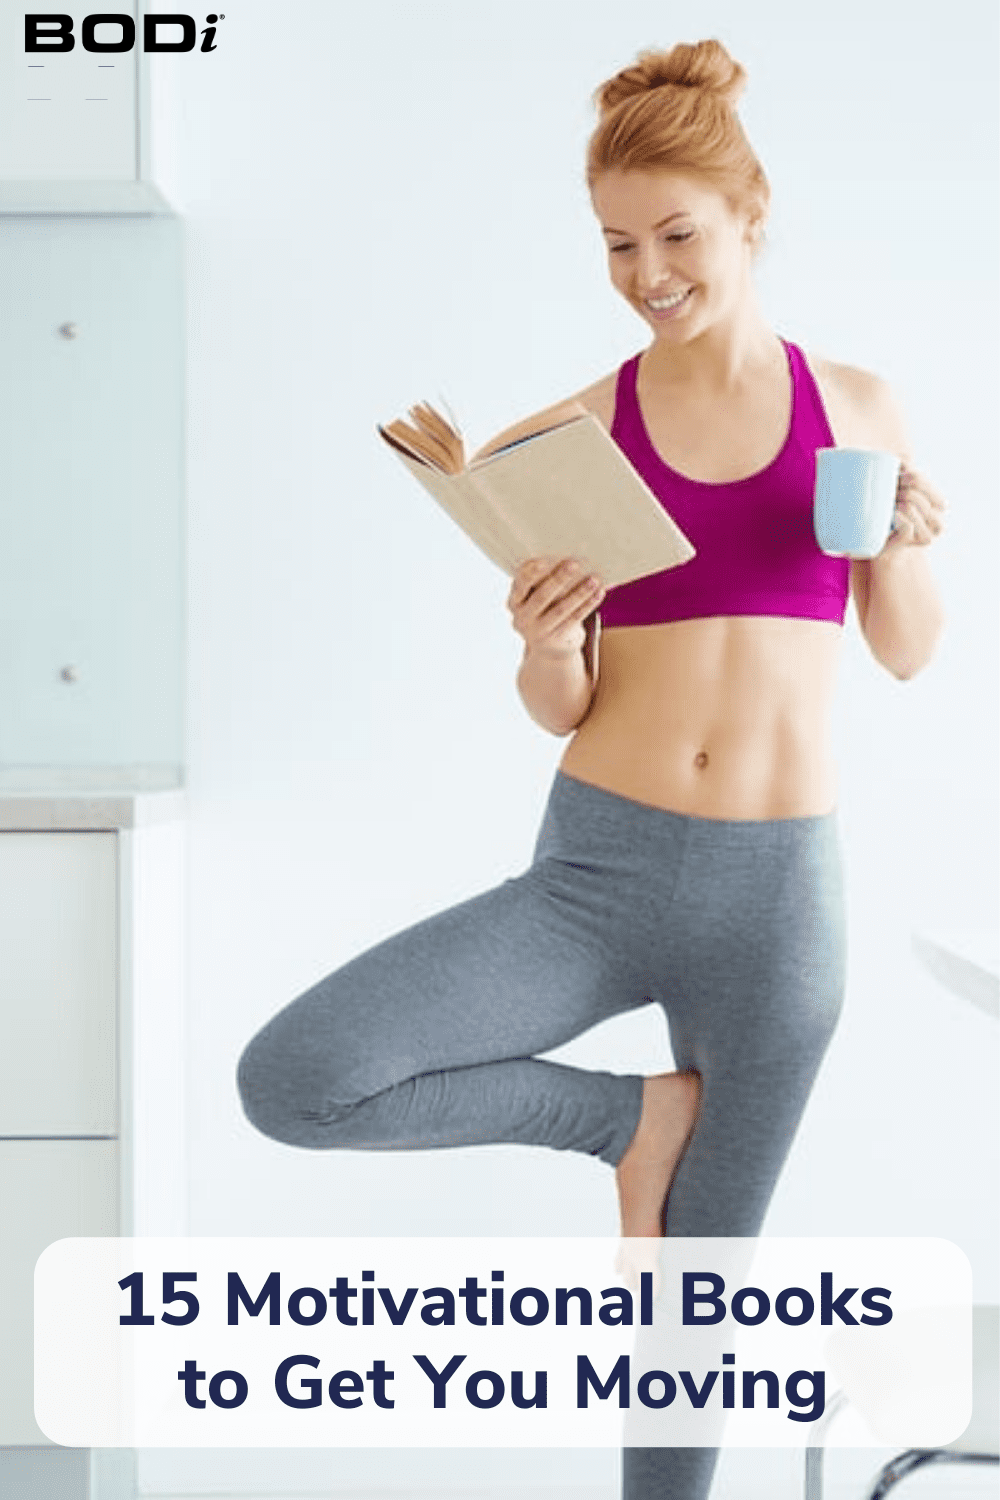 Pin Image with BODi logo of Woman Reading While Doing Yoga | Motivational Books